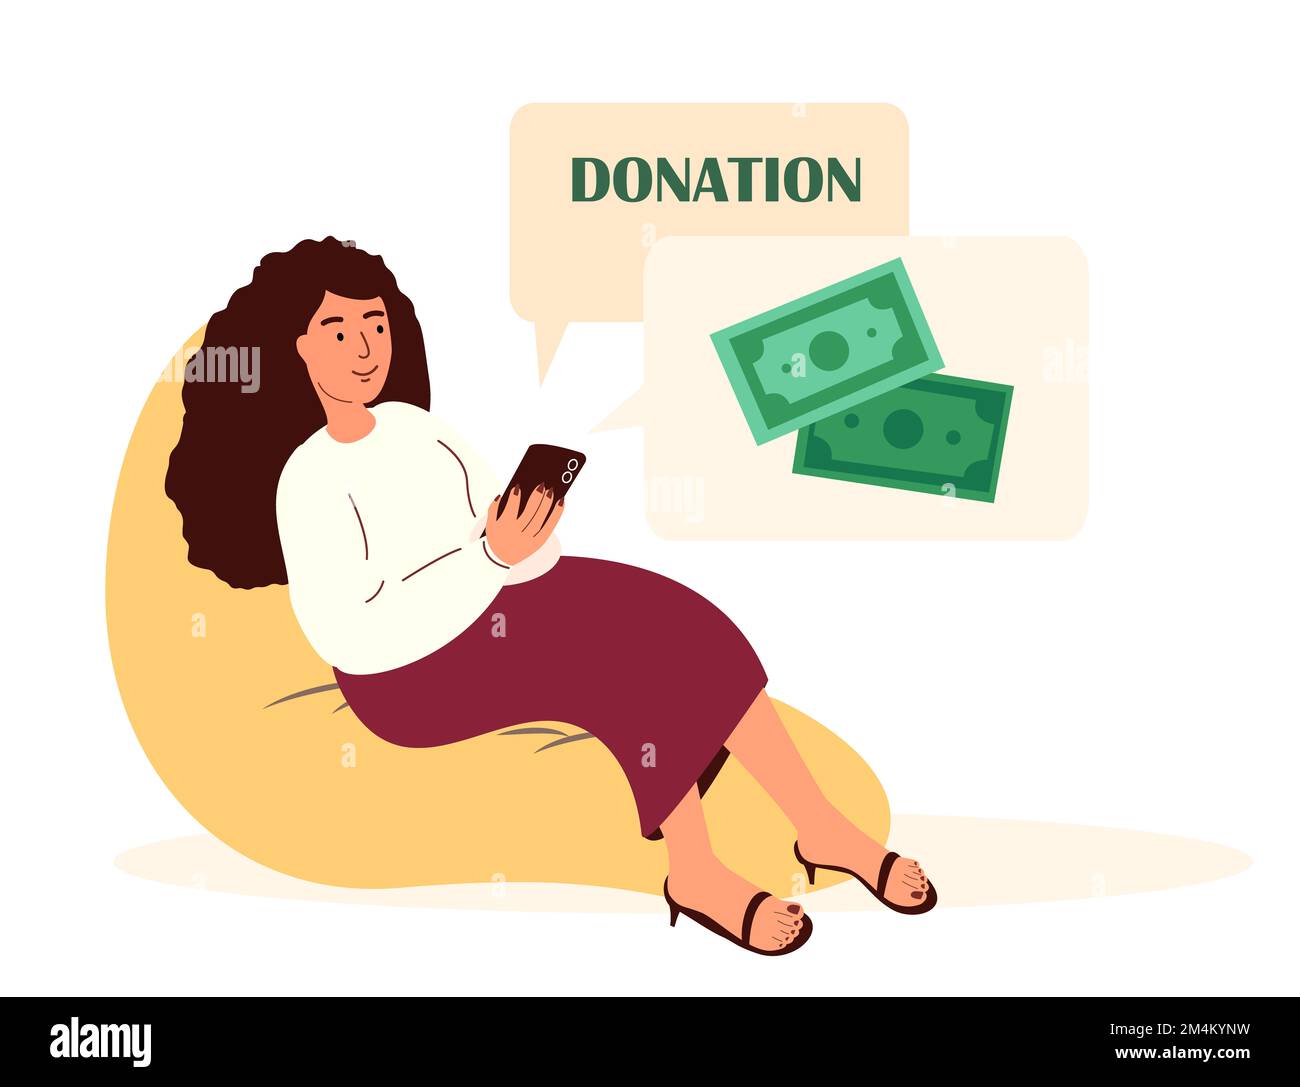 Contribution, Help to People in Need Concept.Woman, Female Character Use Mobile Application for Donation.Donate Money Push Button on Smartphone Screen Stock Photo